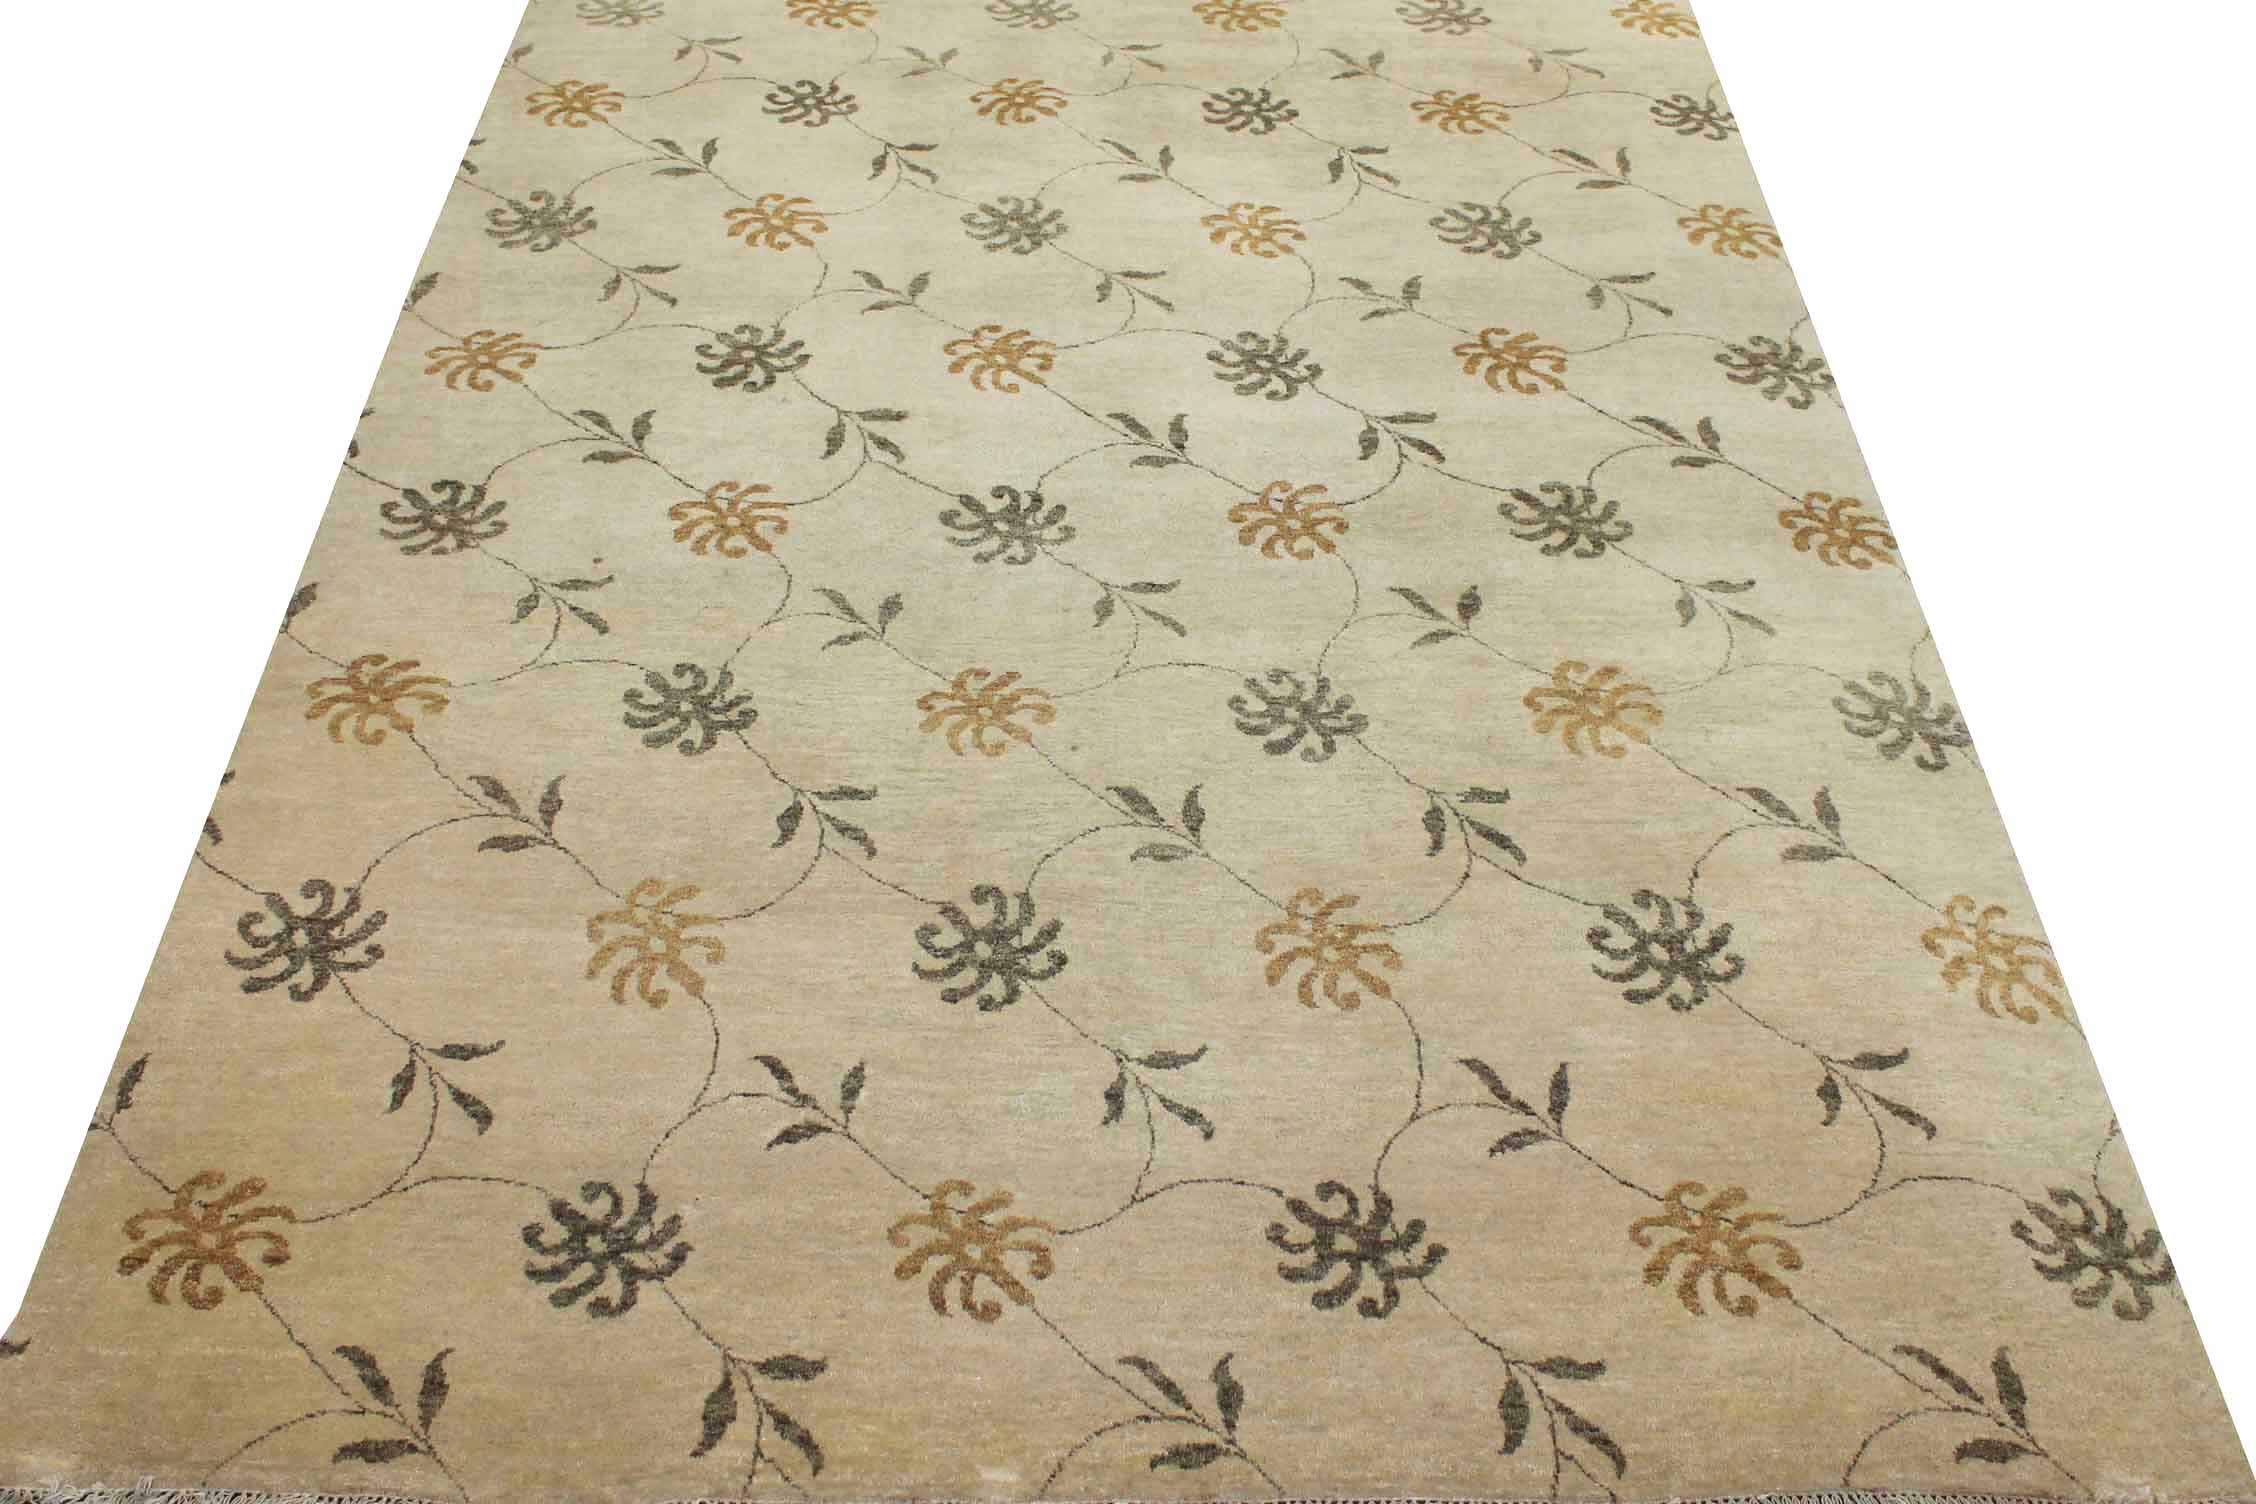 6x9 Traditional Hand Knotted Wool Area Rug - MR8439